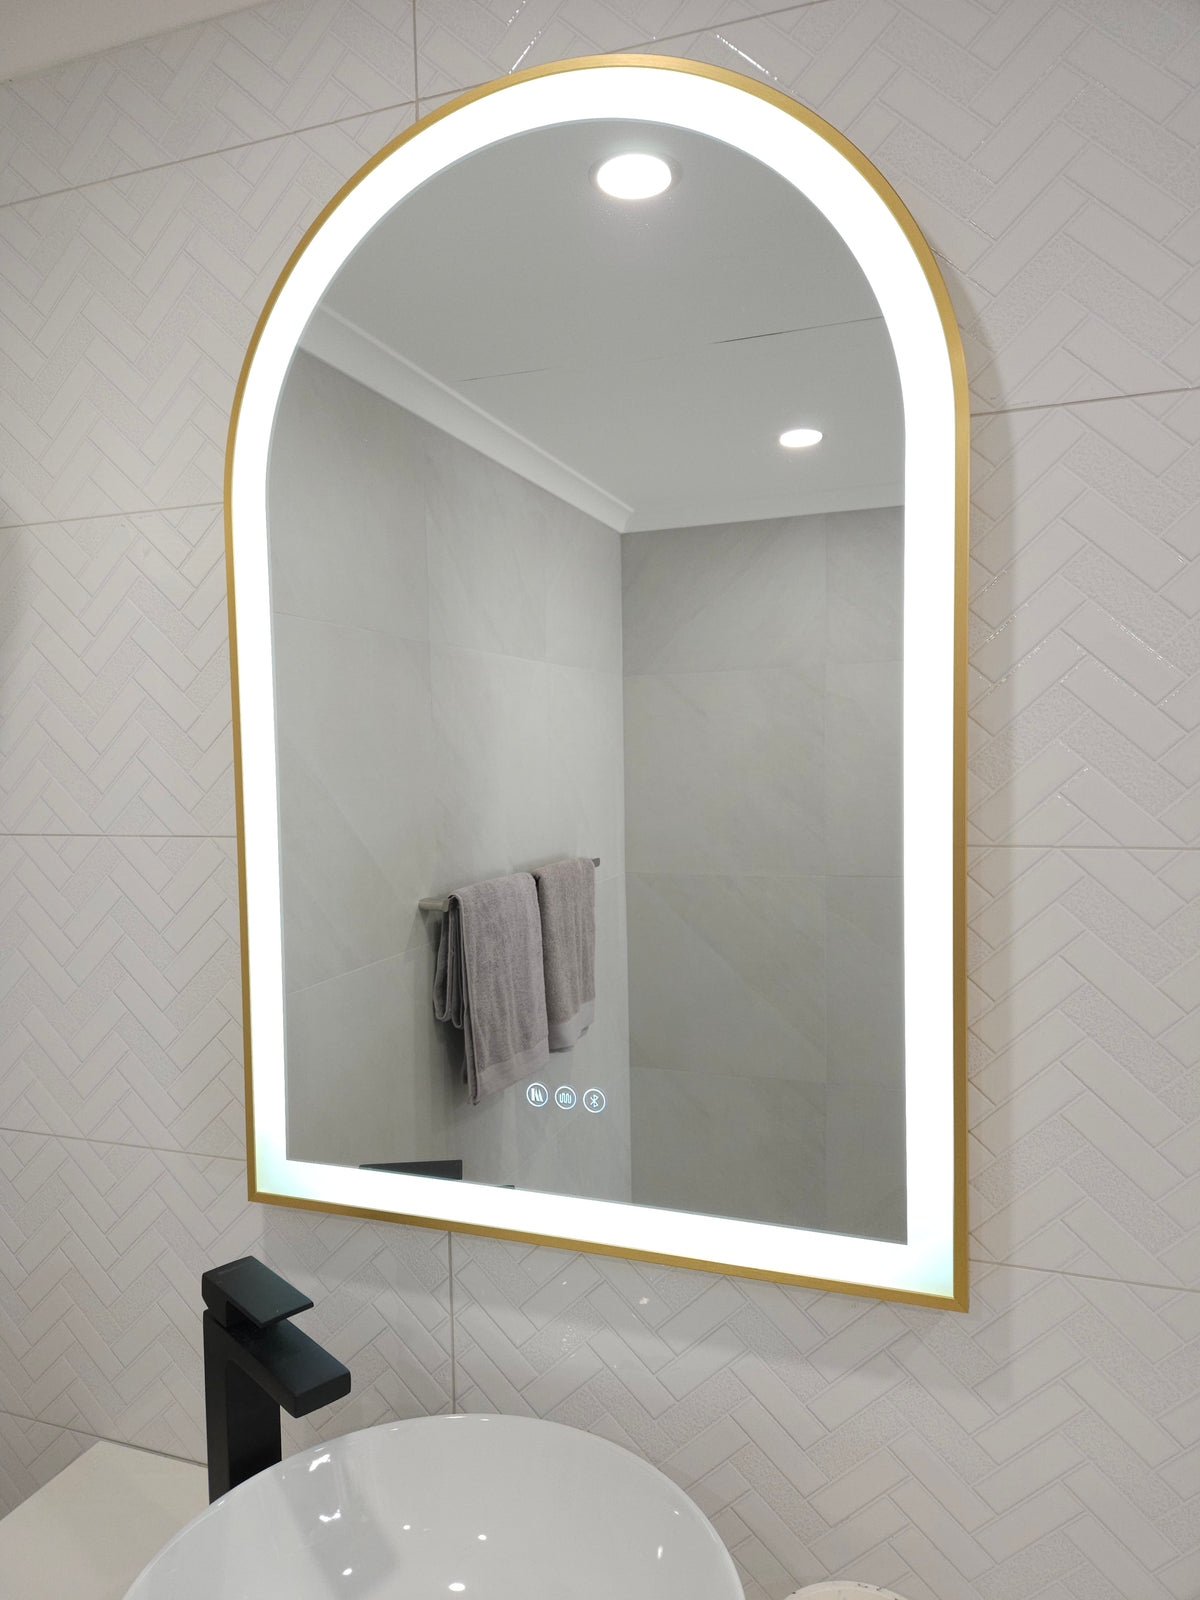 Chic Smart LED Mirror with Gold Frame atop White Sink and Black Faucet